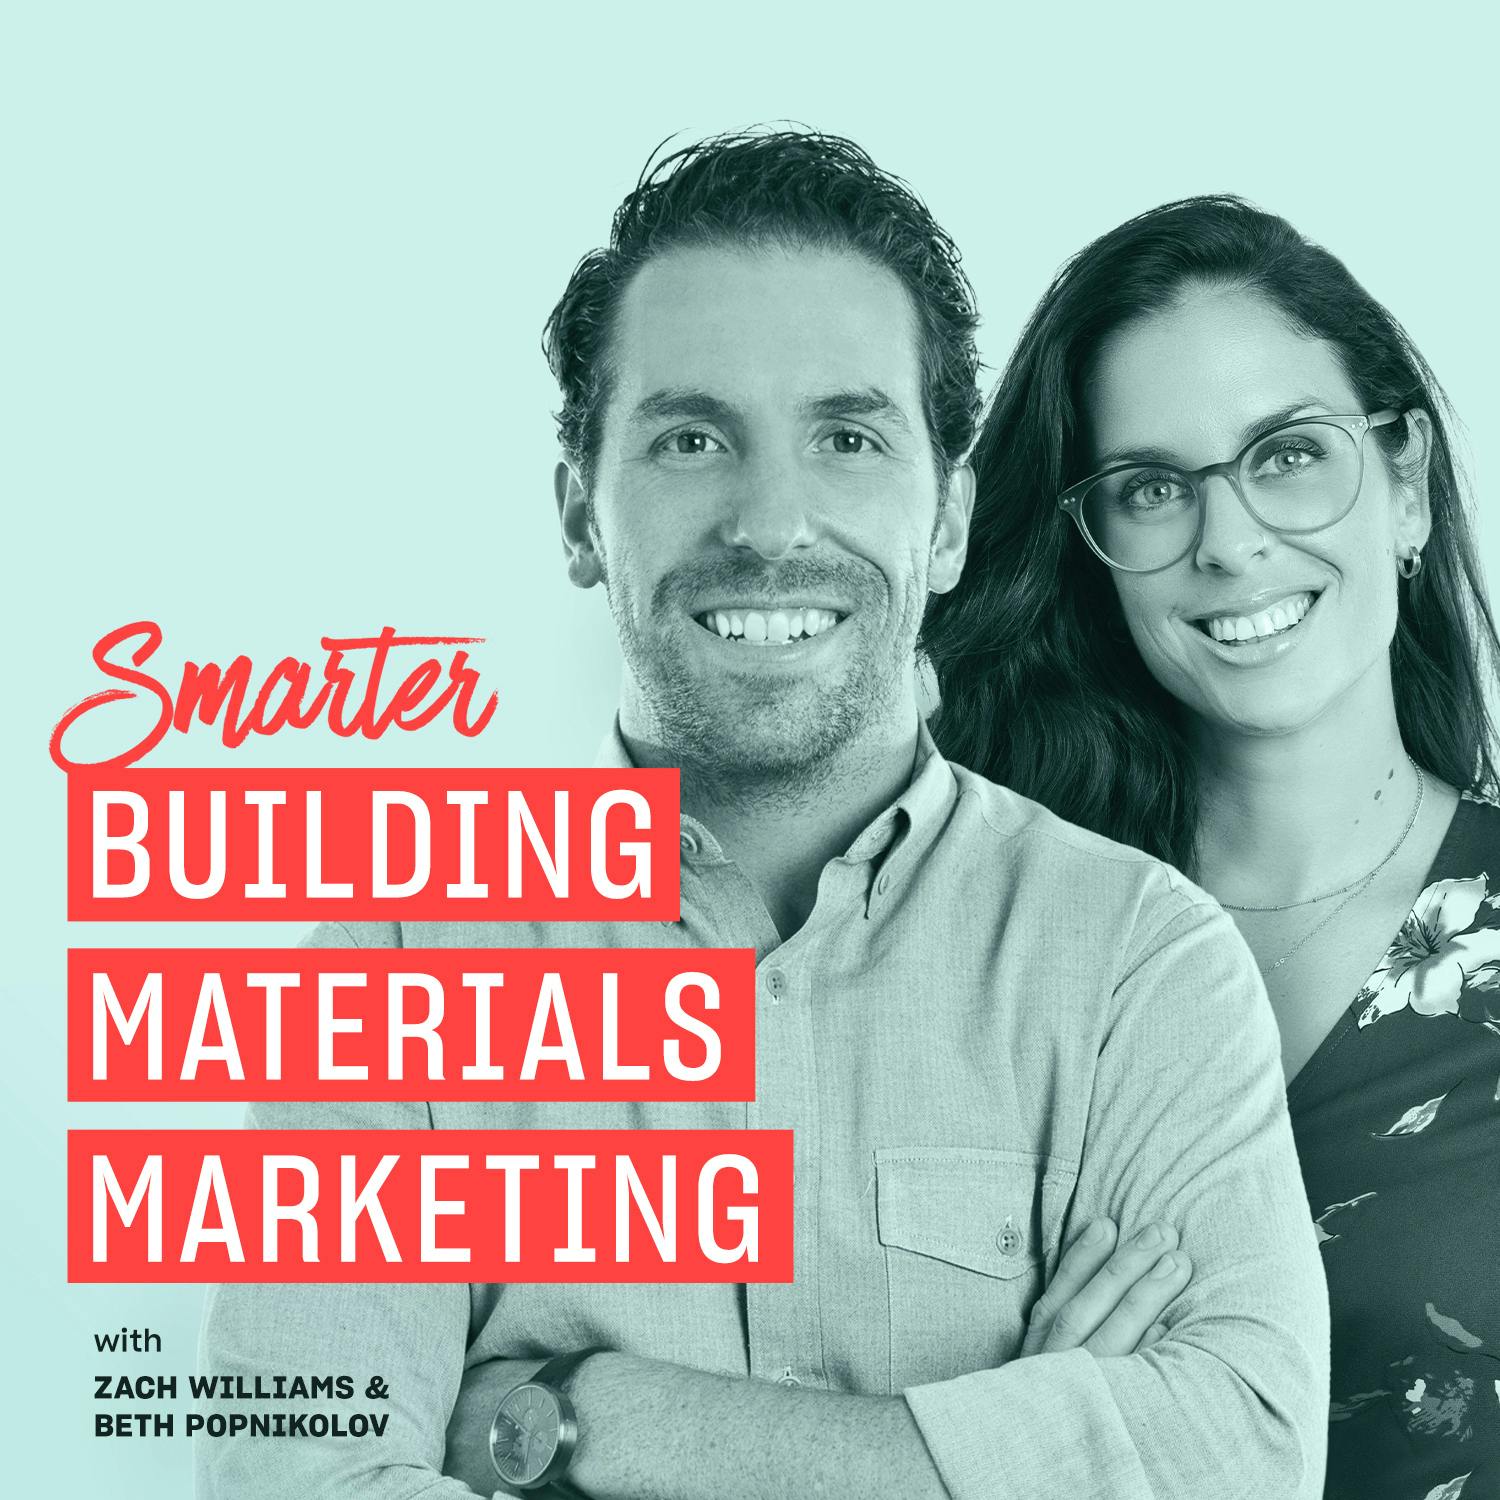 Top 5 Smarter Building Materials Marketing Podcast Episodes of 2021